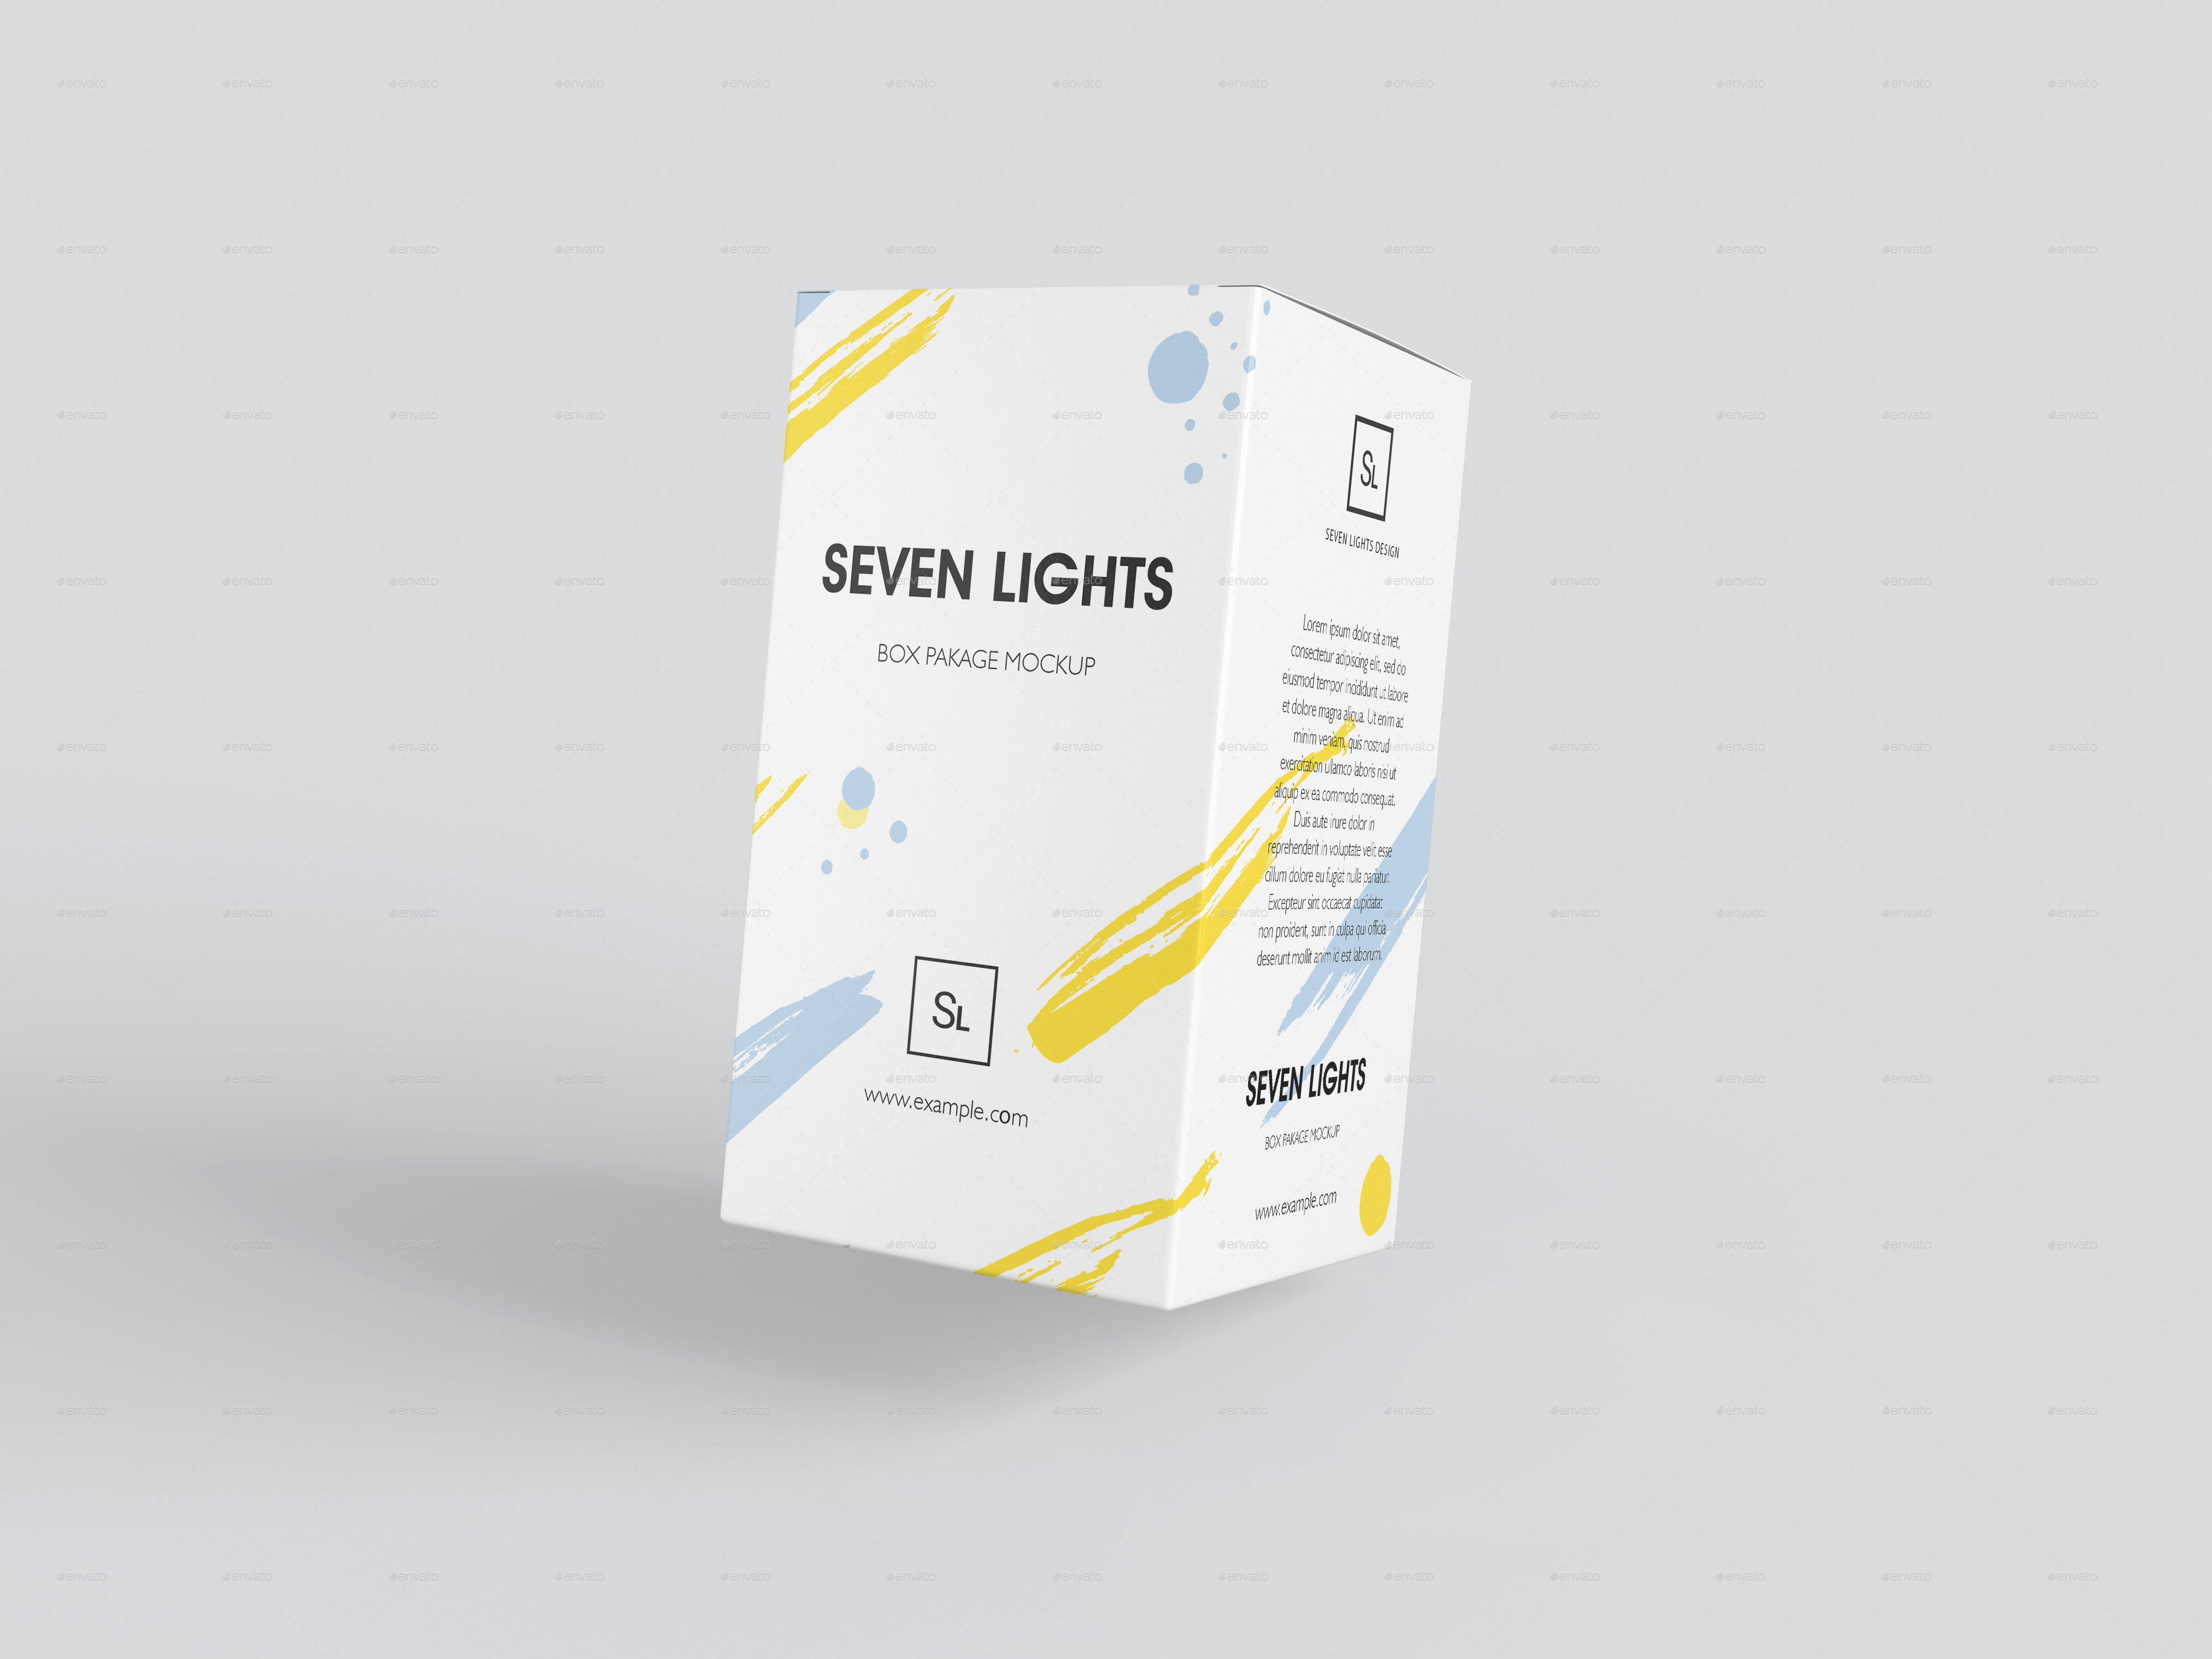 Download Box Packaging Mockup By 7lights Graphicriver PSD Mockup Templates